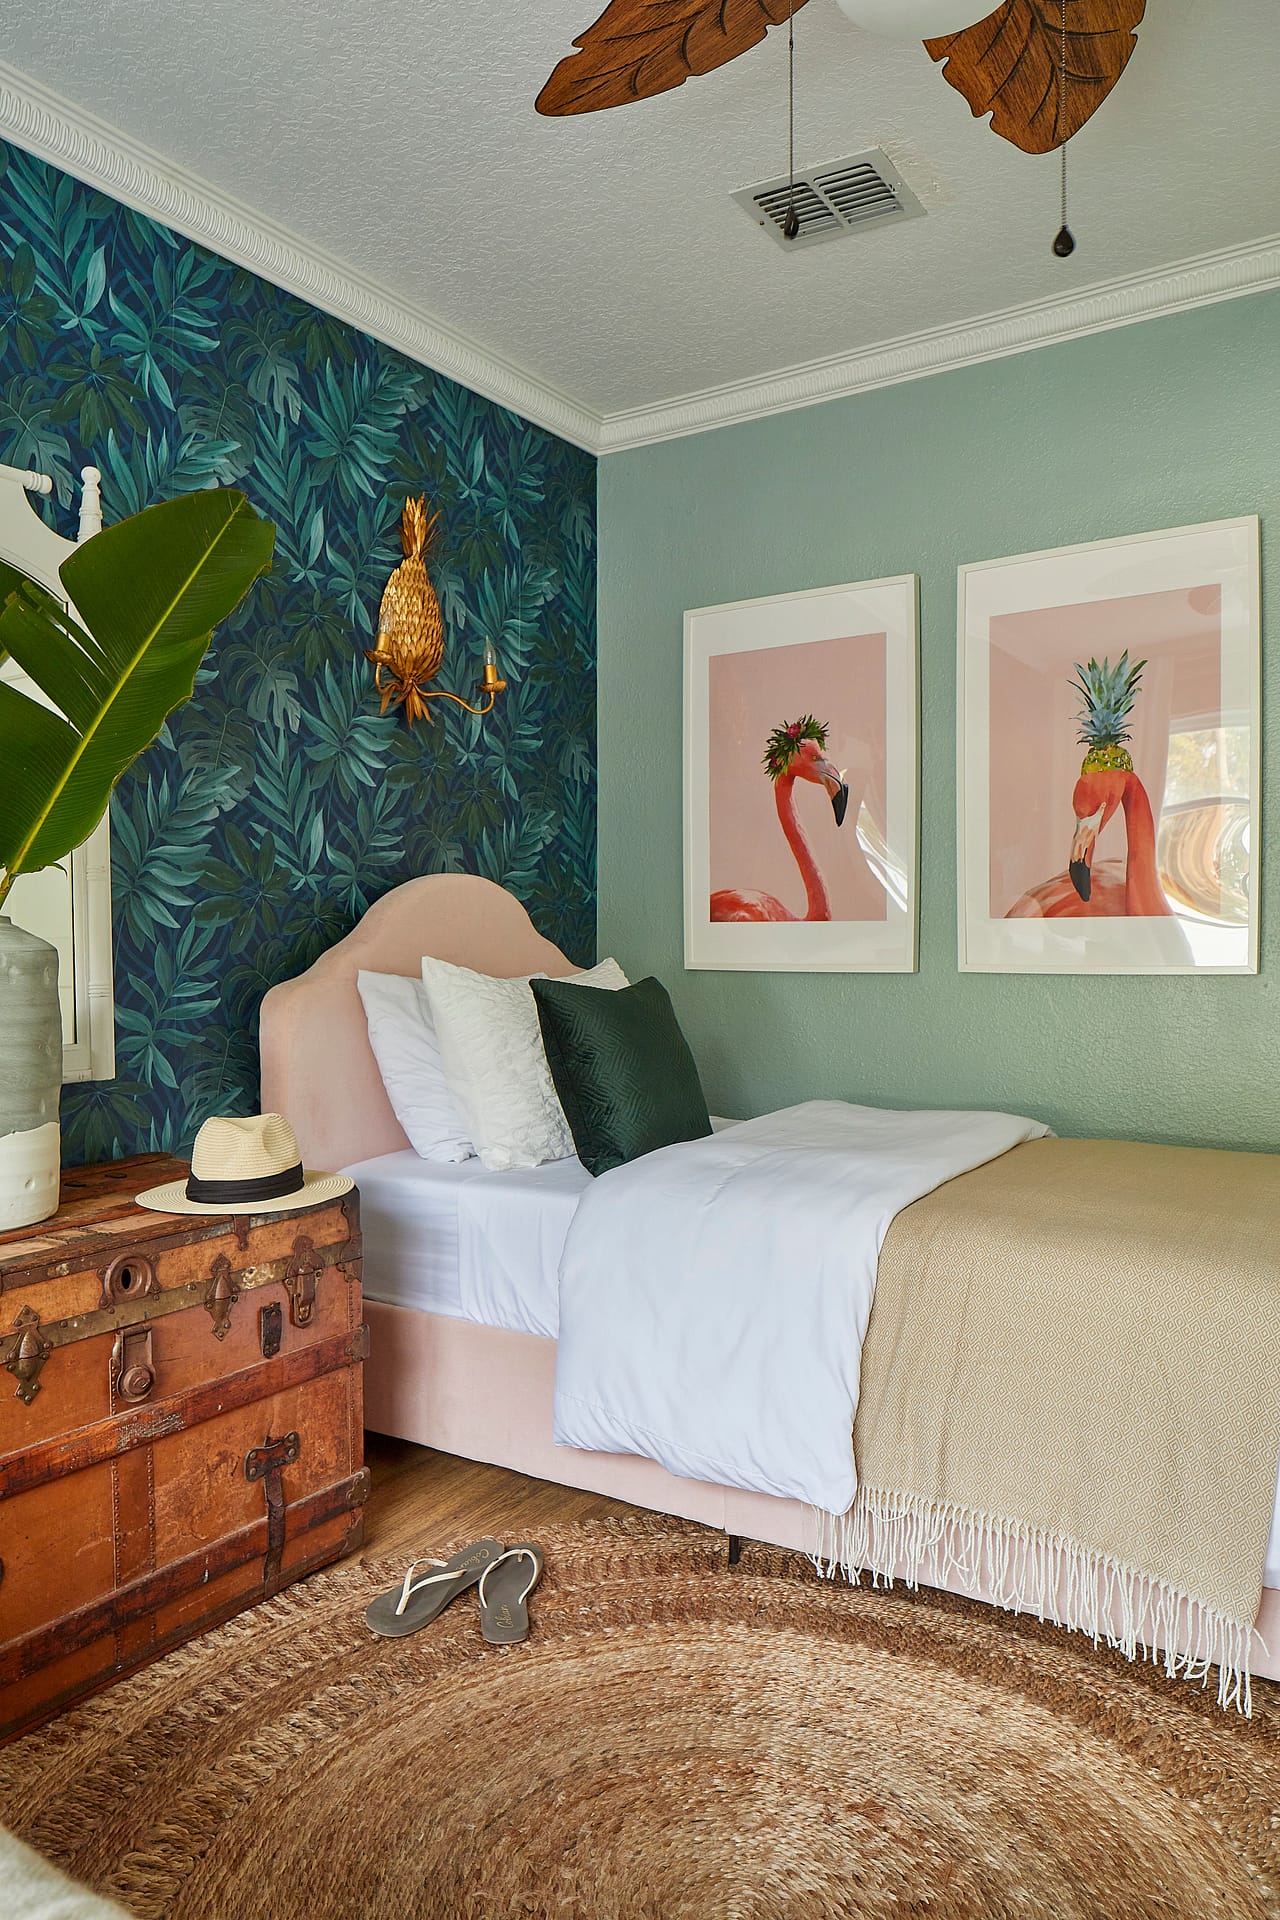 Color Pops: Adding Accents And Contrast to Elevate Your Bedroom